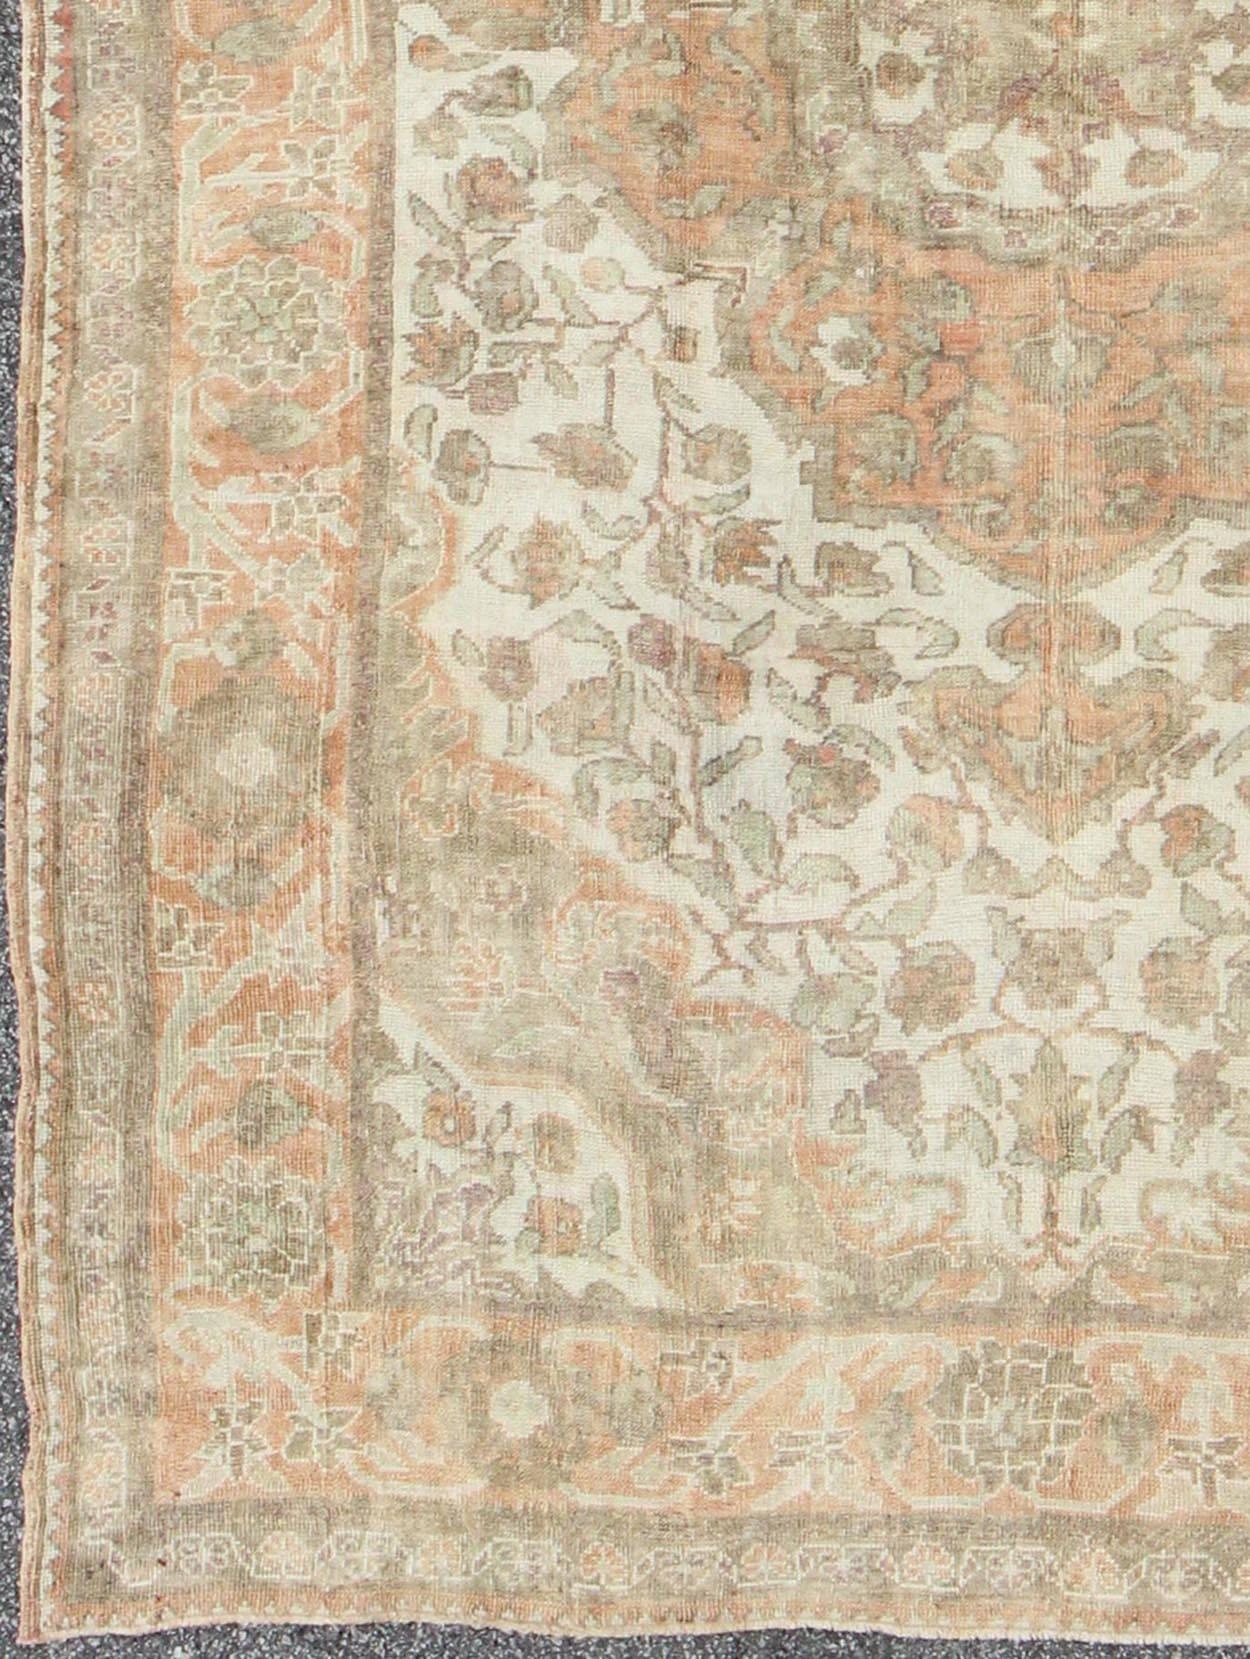 Measures: 6'9 x 9'3

This wonderful medallion Oushak features a soft color palette. The border has flowers connected by vines while the field also features a flower pattern. The colors are earth-toned and muted, including peach, tan, ivory, light